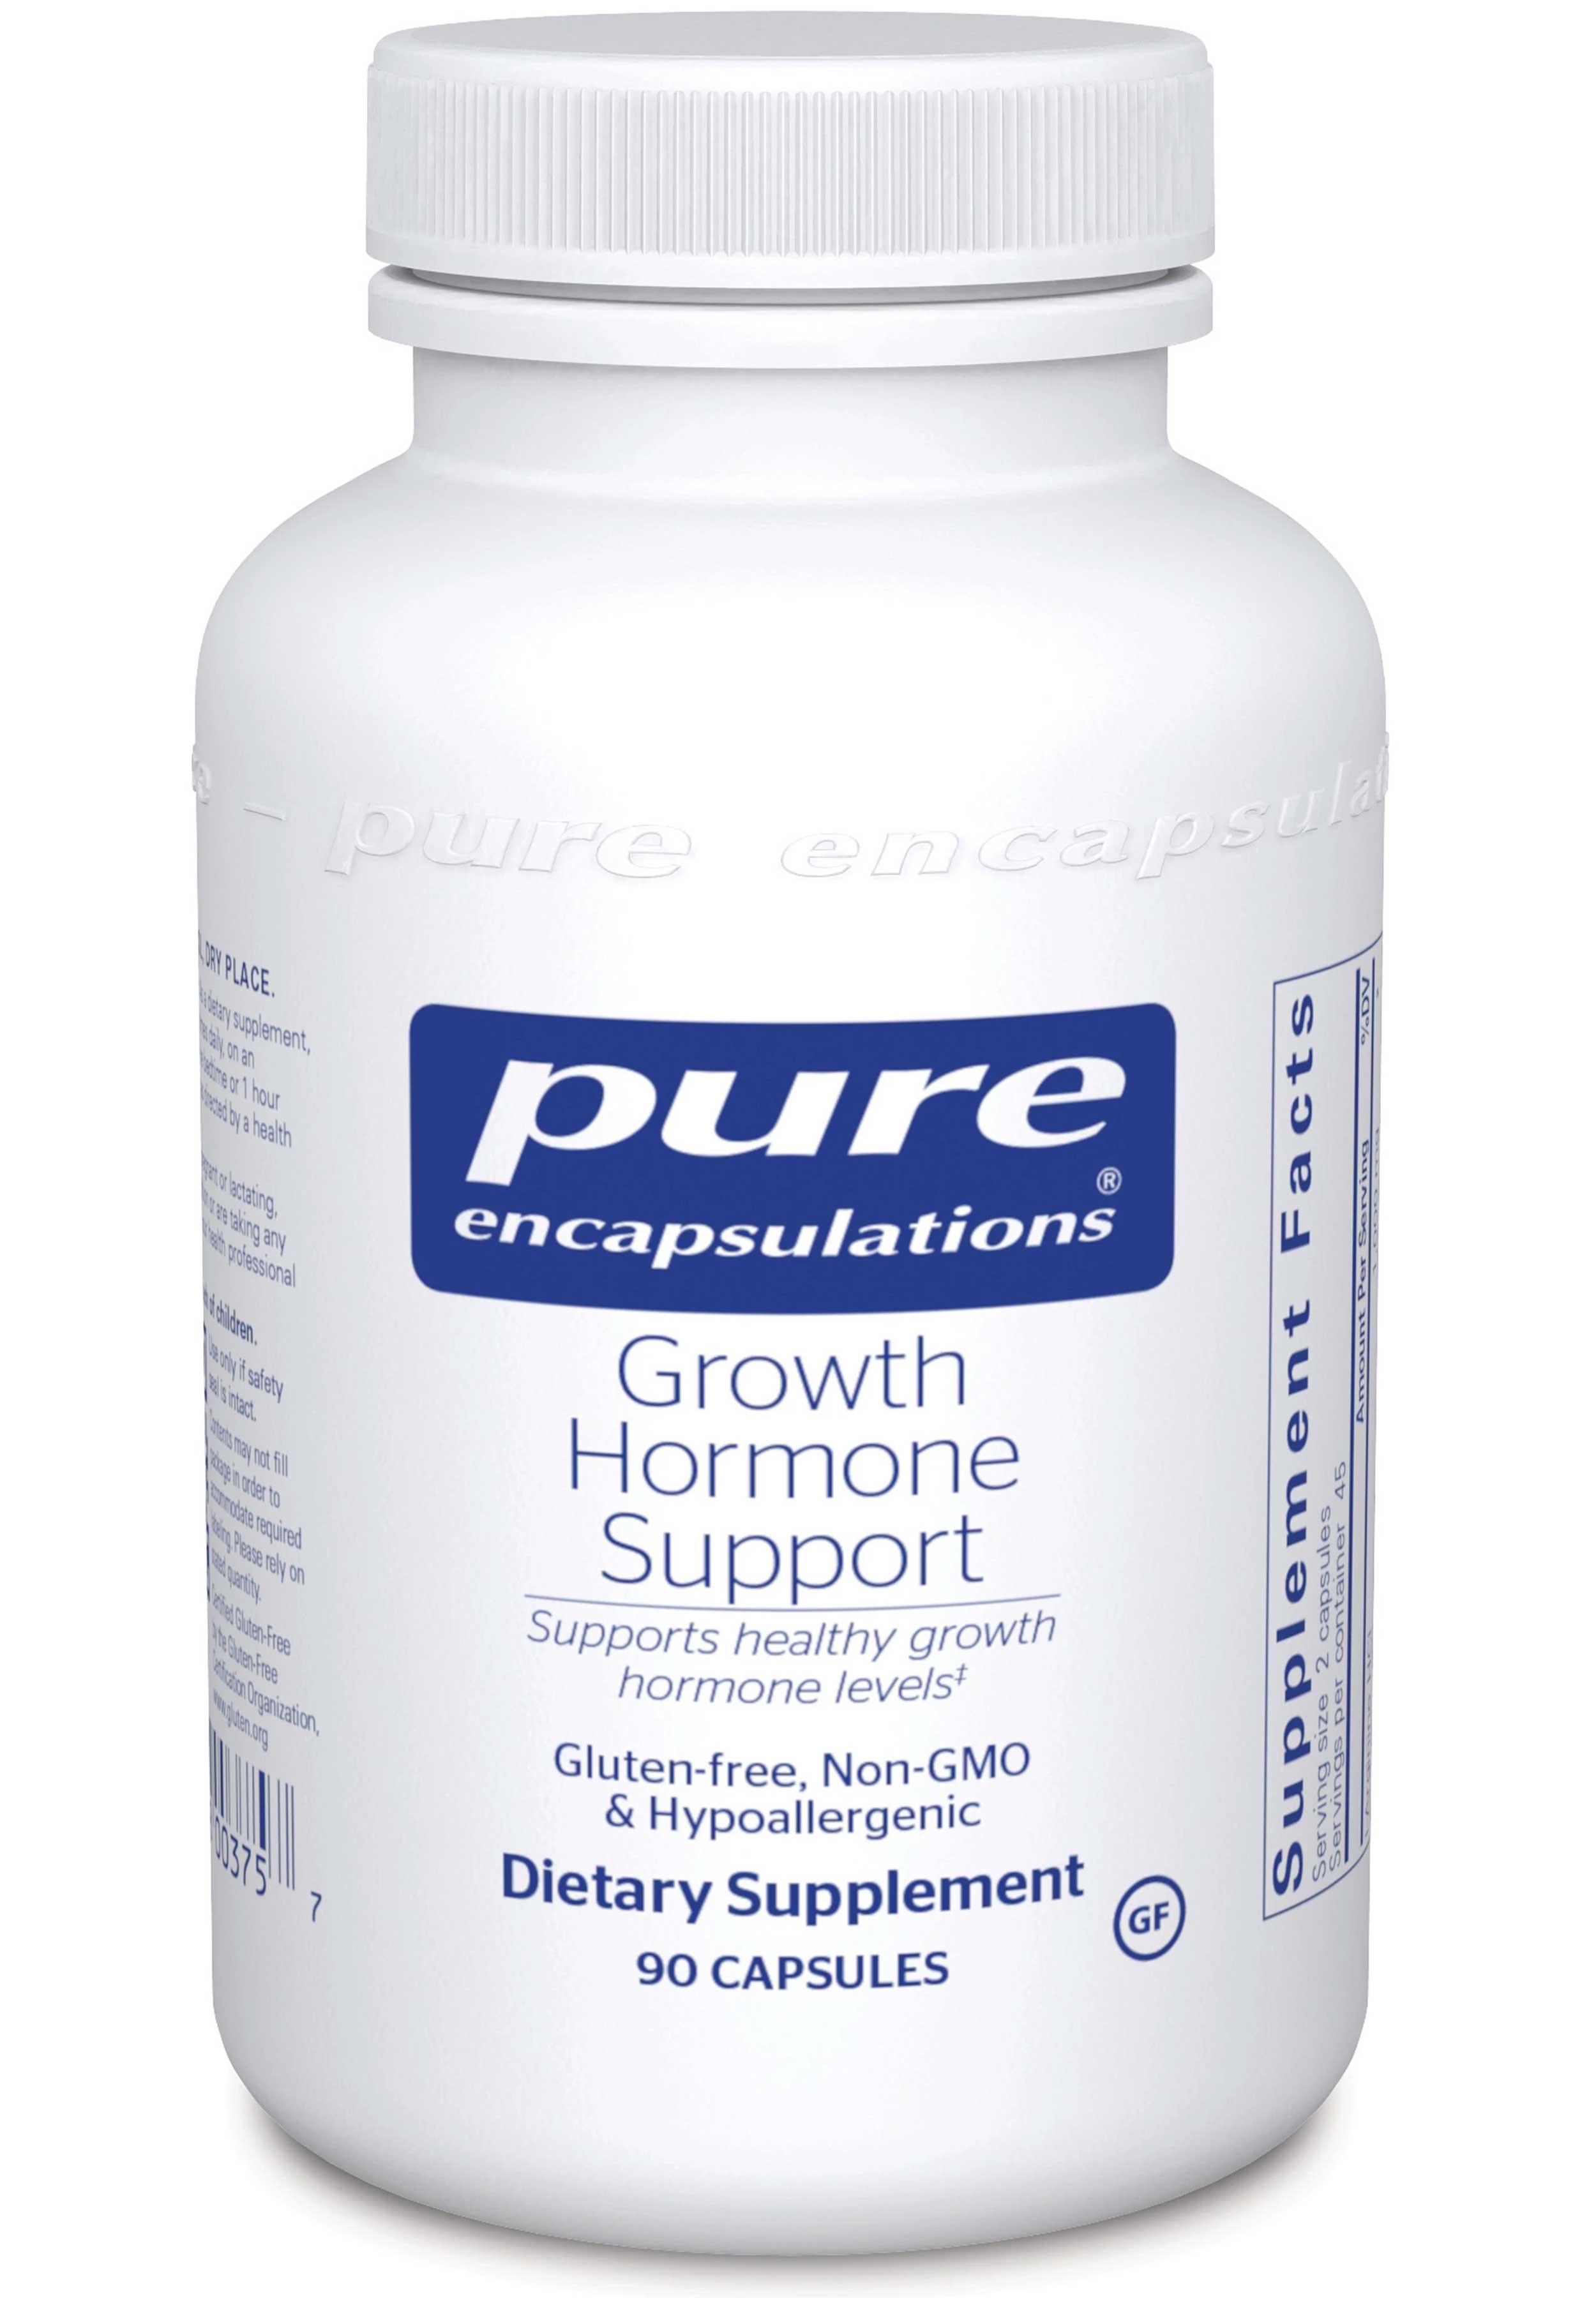 Pure Encapsulations Growth Hormone Support